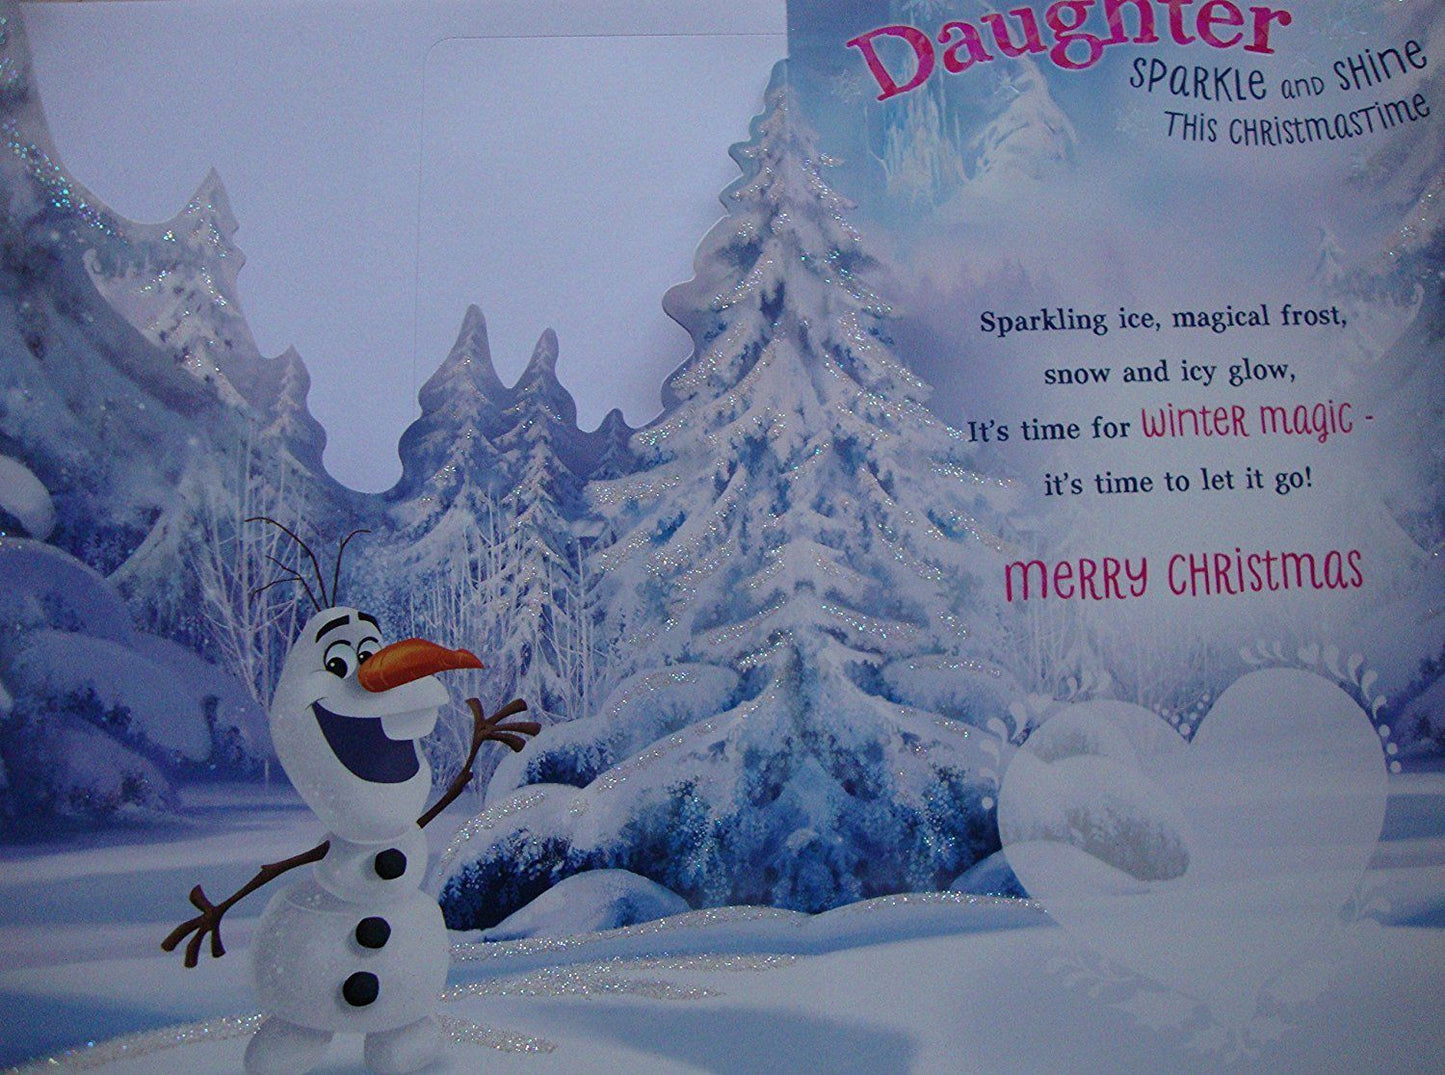 Daughter Sparkle And Shine Disney Frozen Christmas Card 